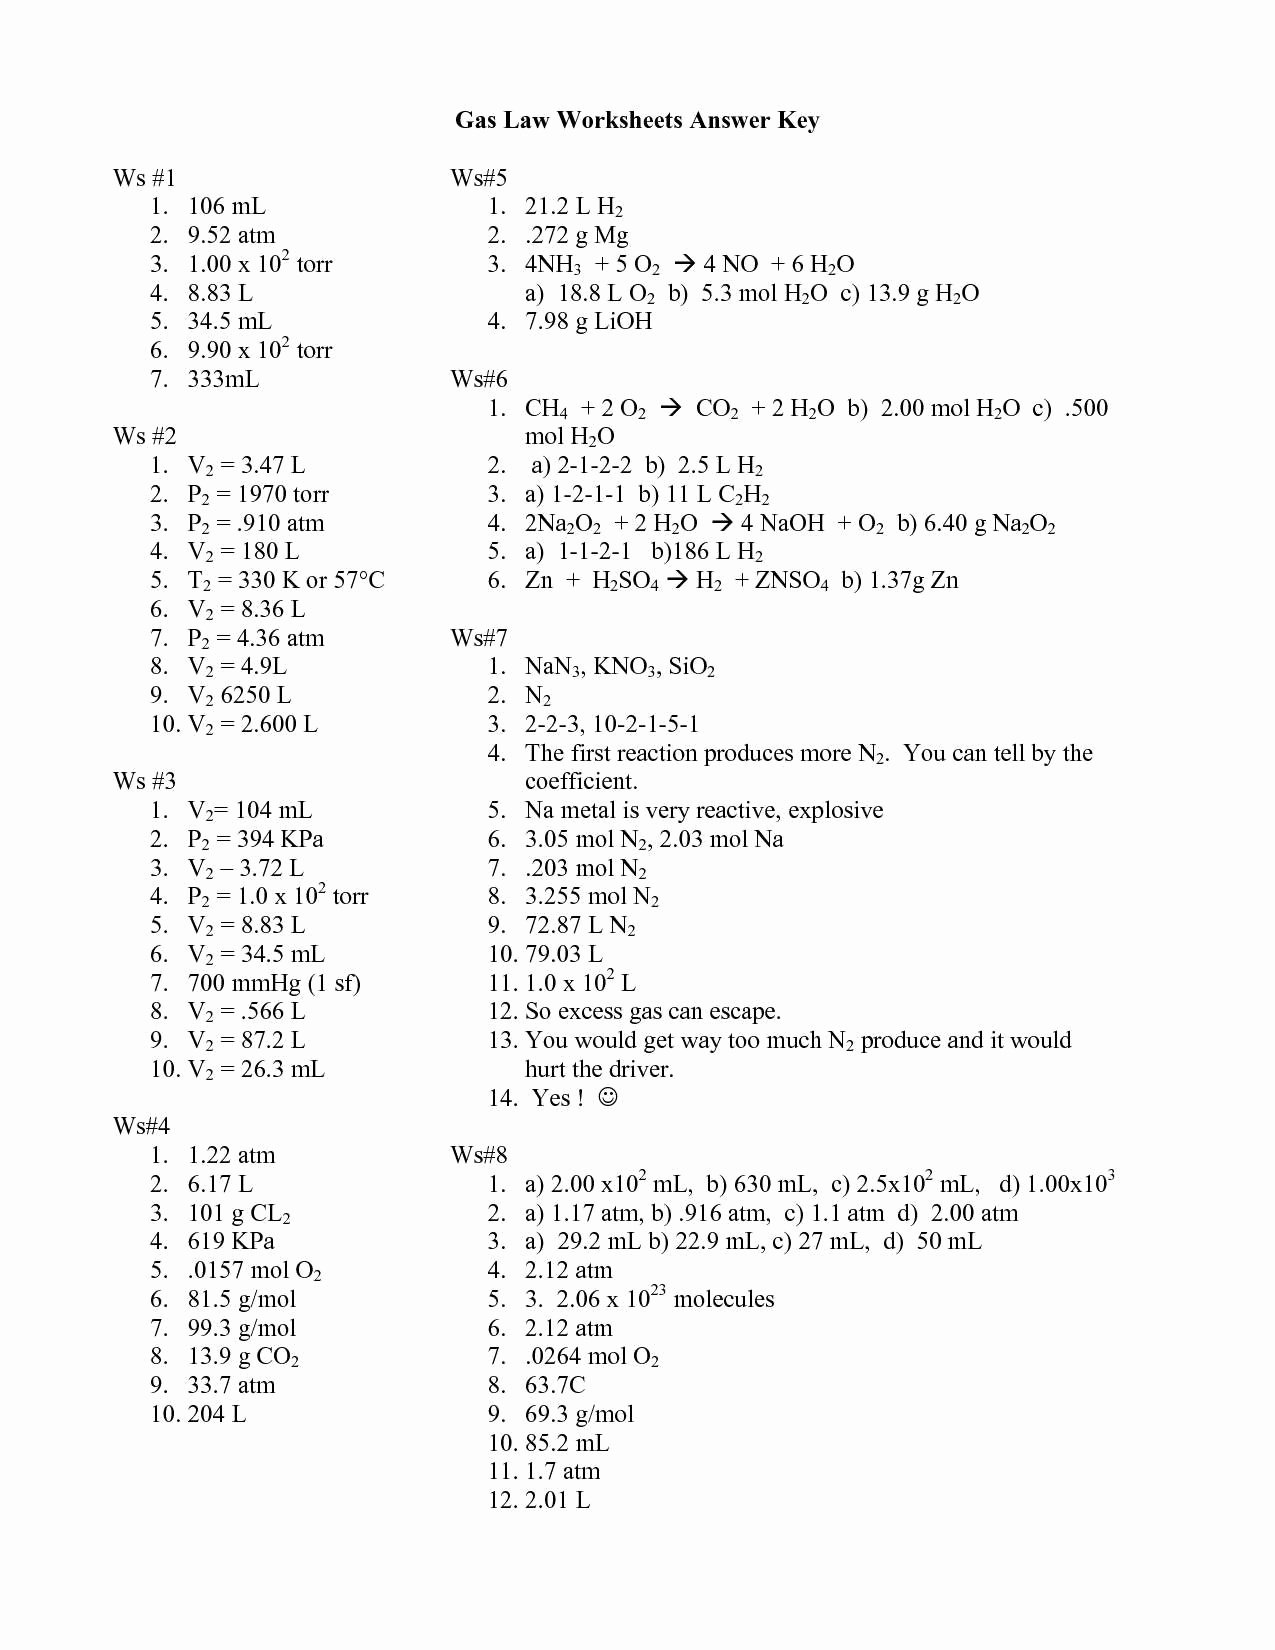 Ohm&amp;#039;s Law Worksheet Answers Best Of Gas Laws Worksheet 1 Answer Key Worksheet Idea Template